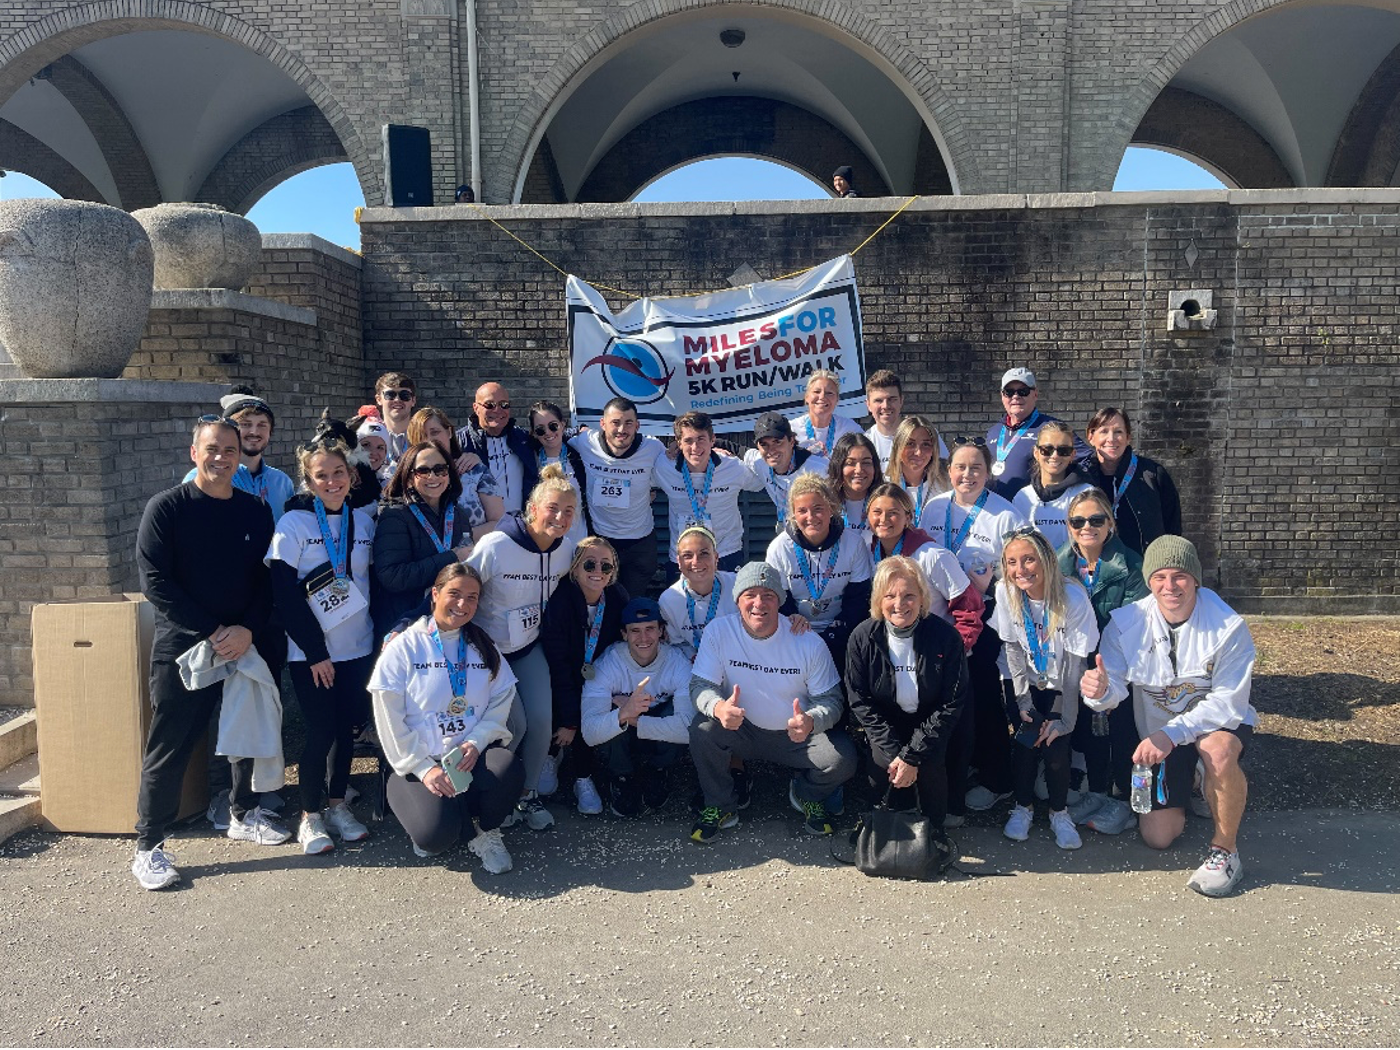 The International Myeloma Foundation Announces the Annual Miles for Myeloma 5K Run/Walk: 15 Years of Making a Difference in the Myeloma Community